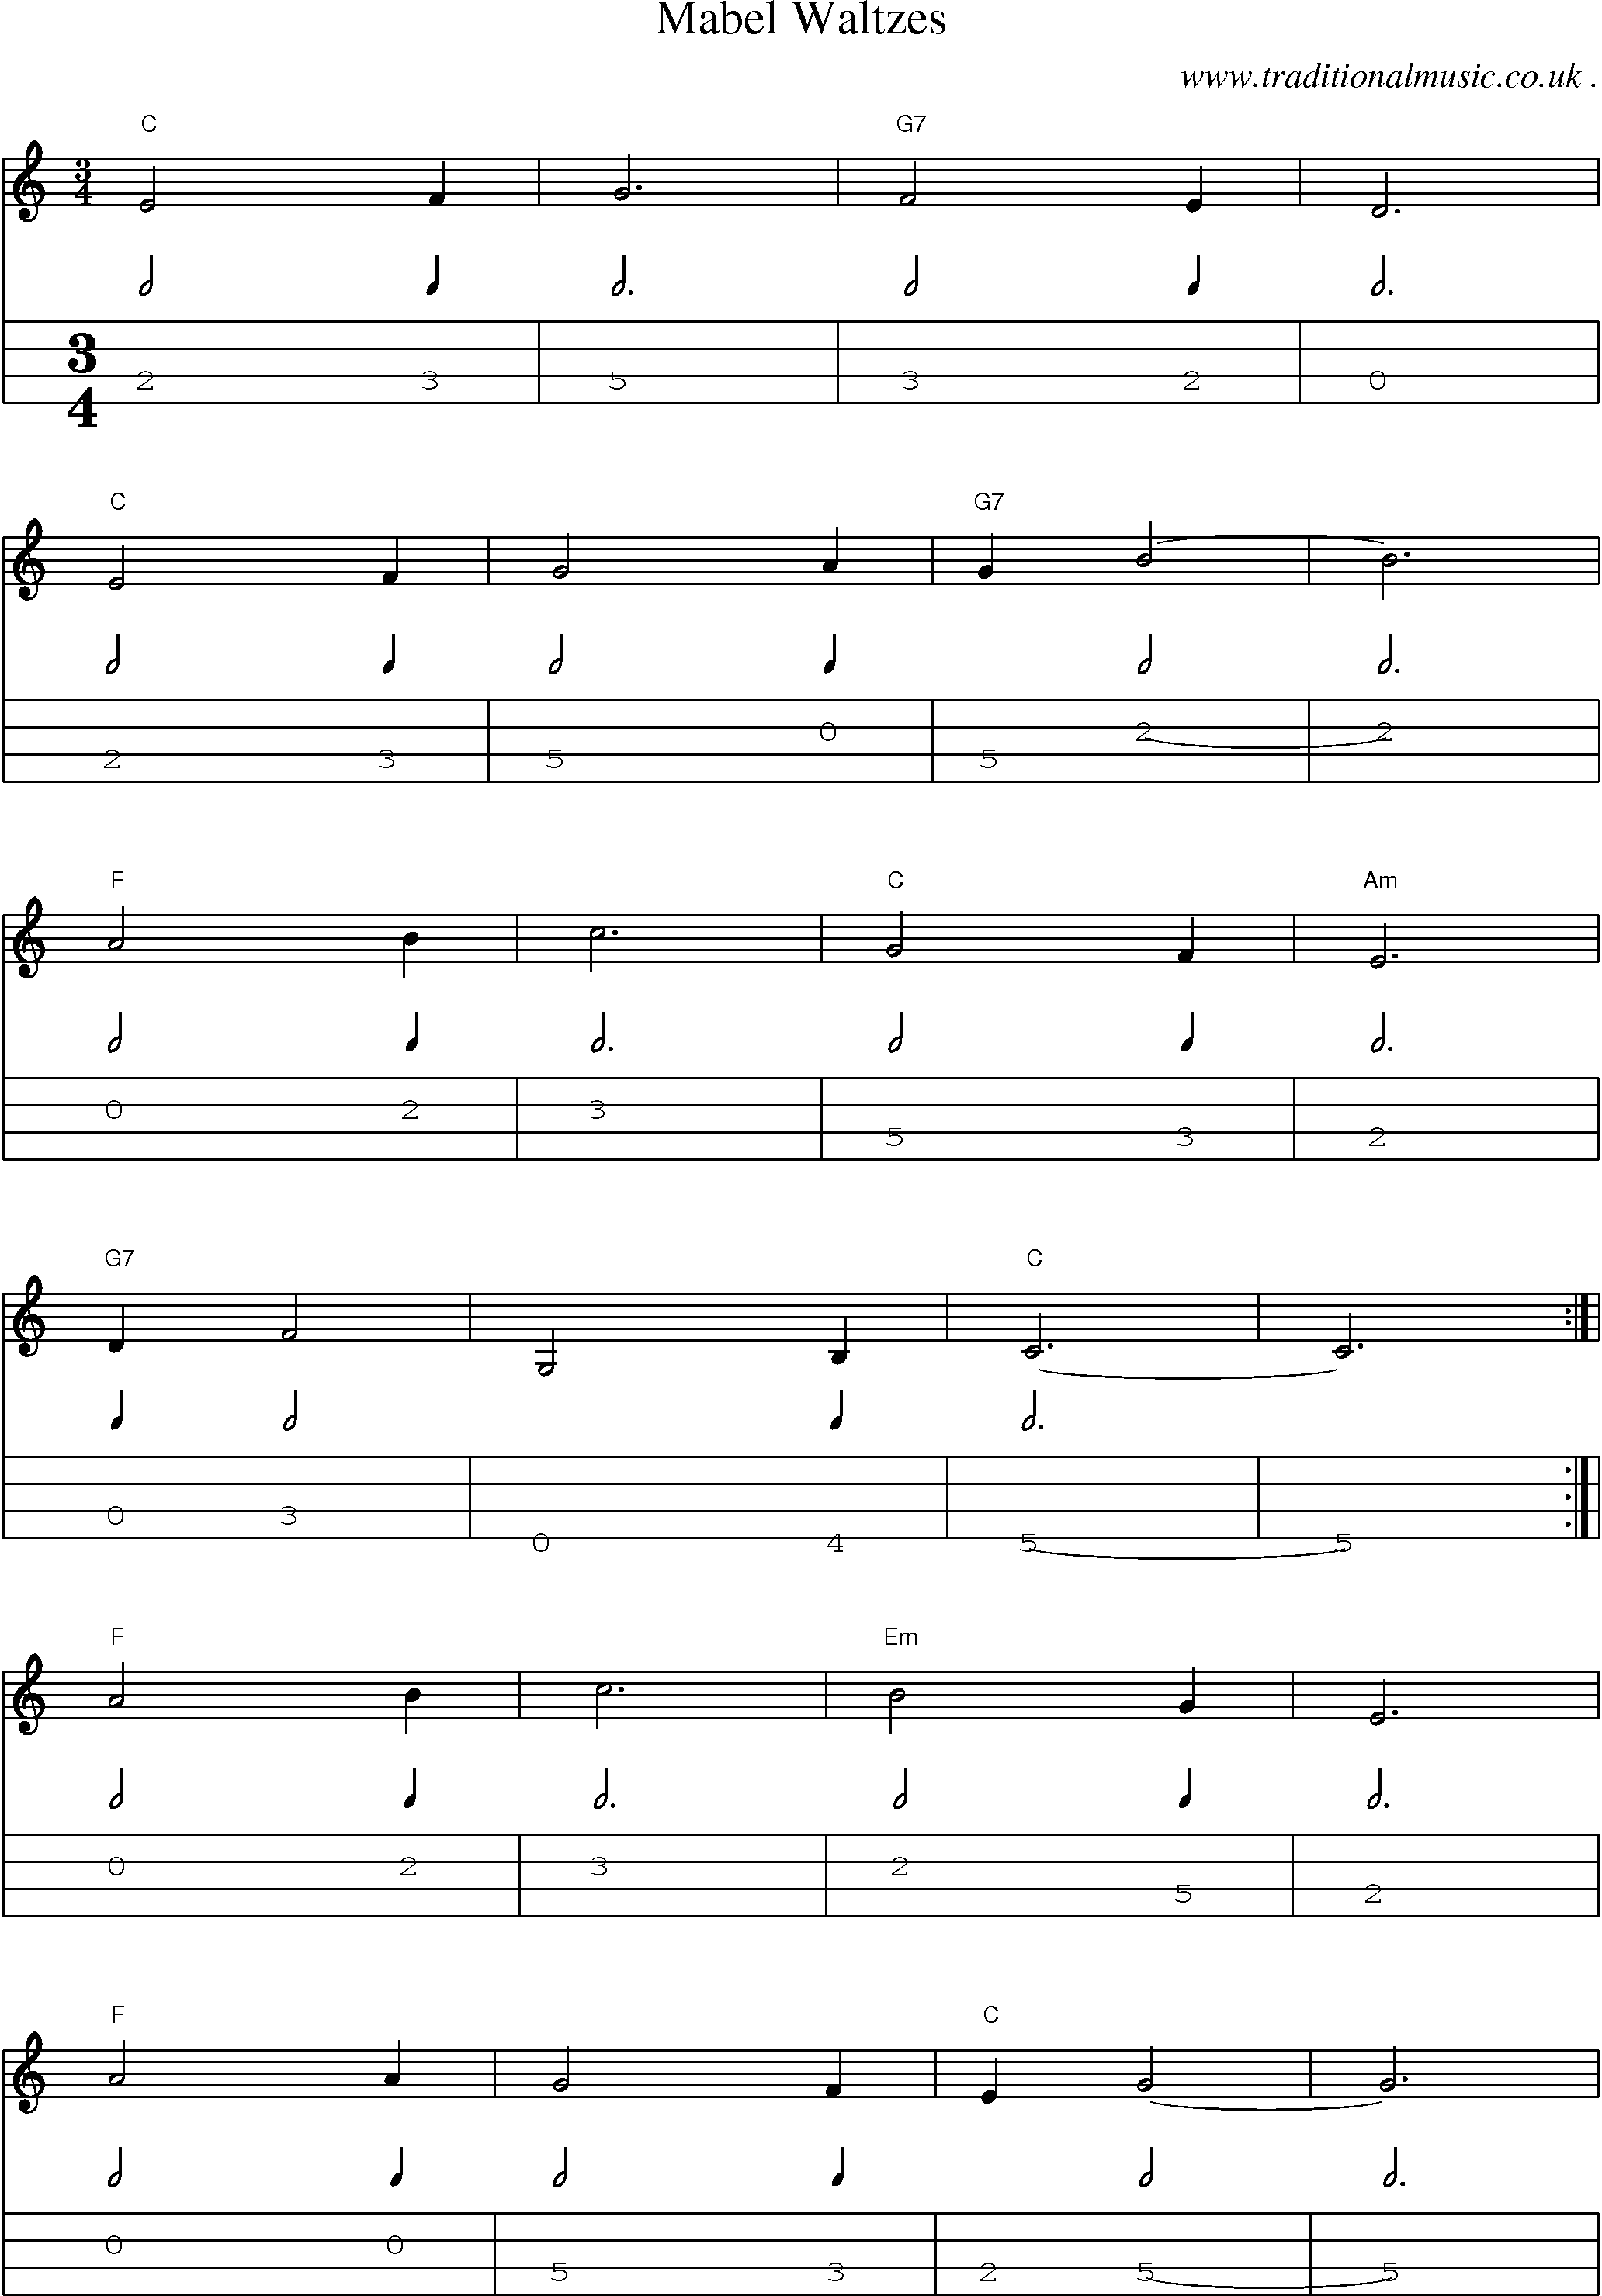 Sheet-Music and Mandolin Tabs for Mabel Waltzes